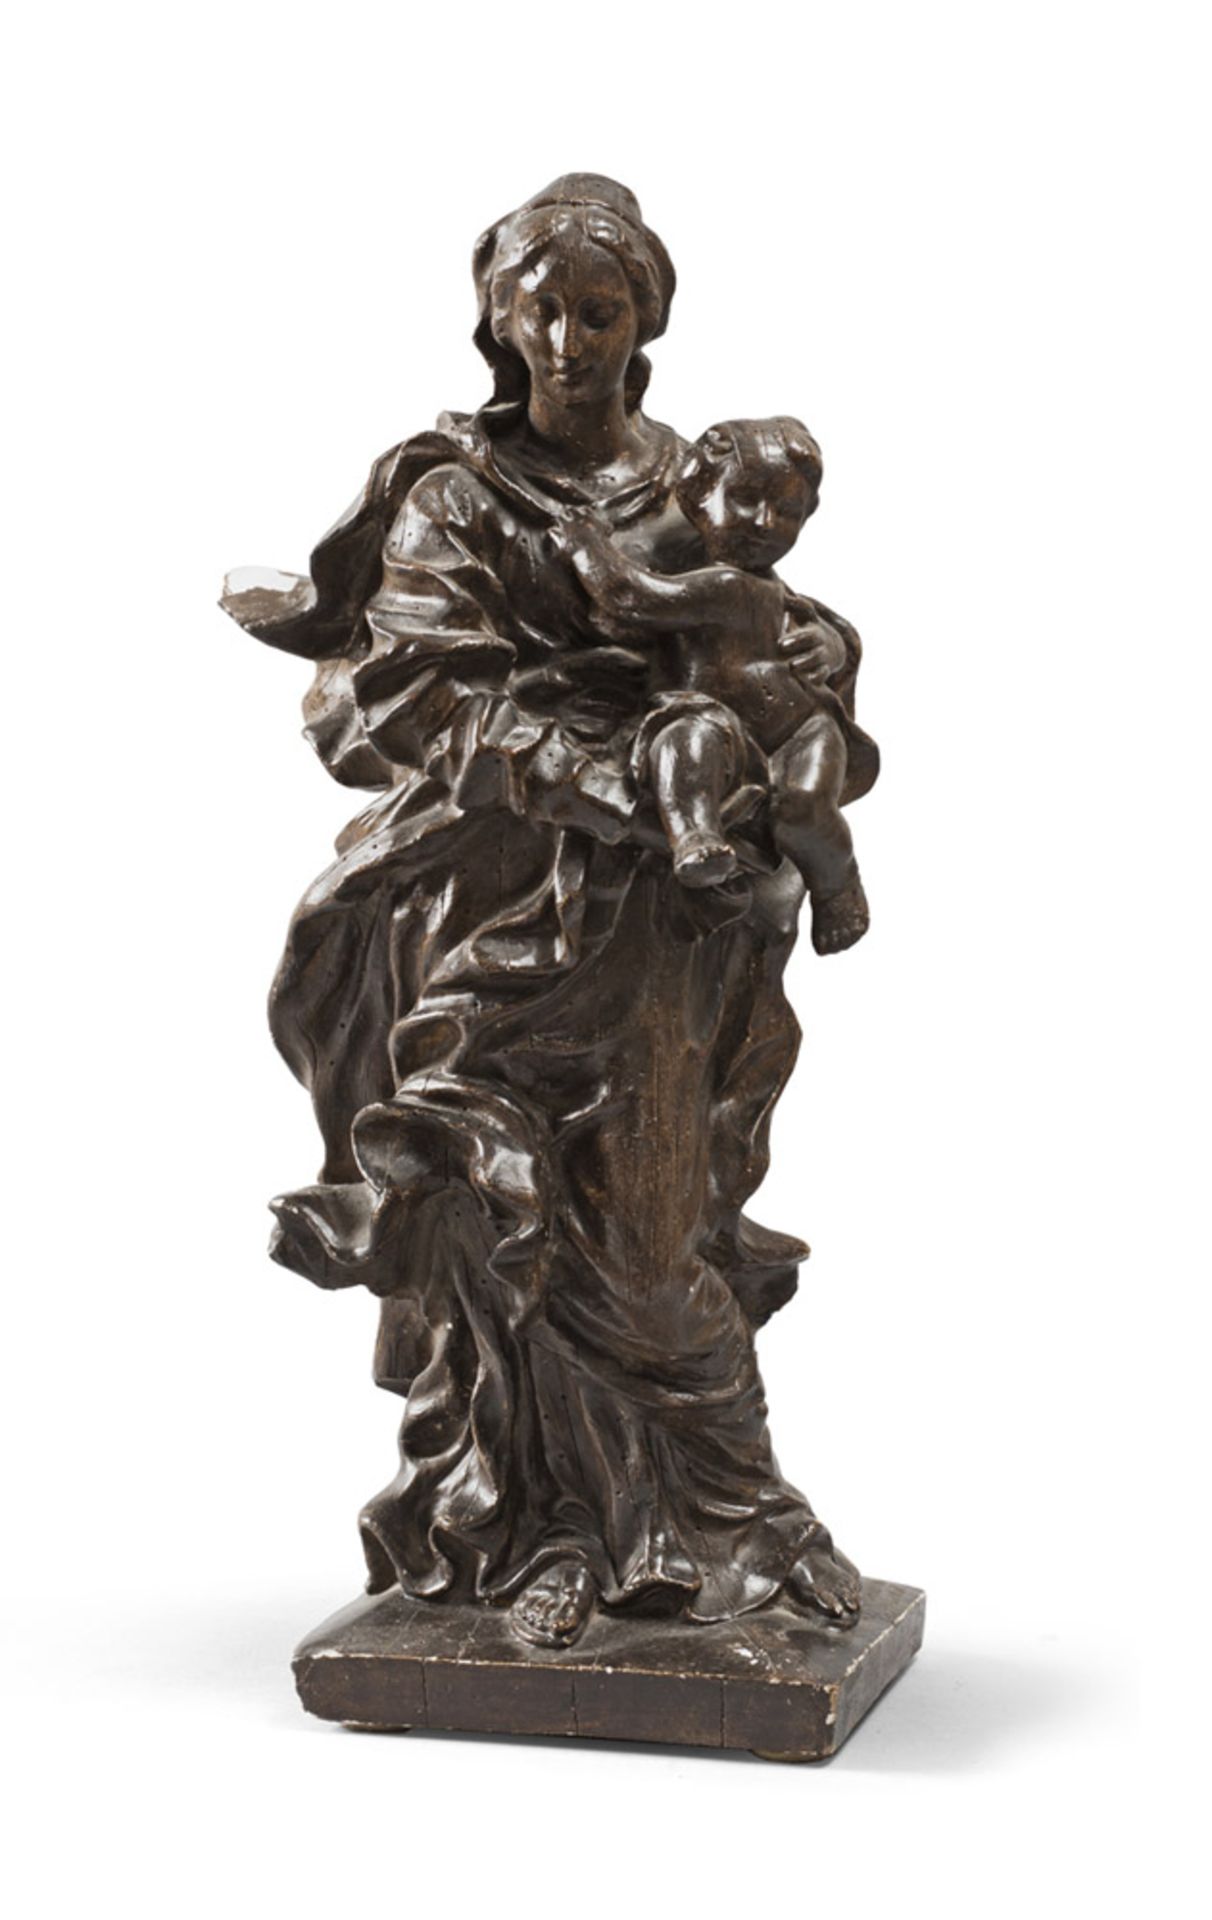 SCULPTURE OF THE VIRGIN AND CHILD, 20TH CENTURY